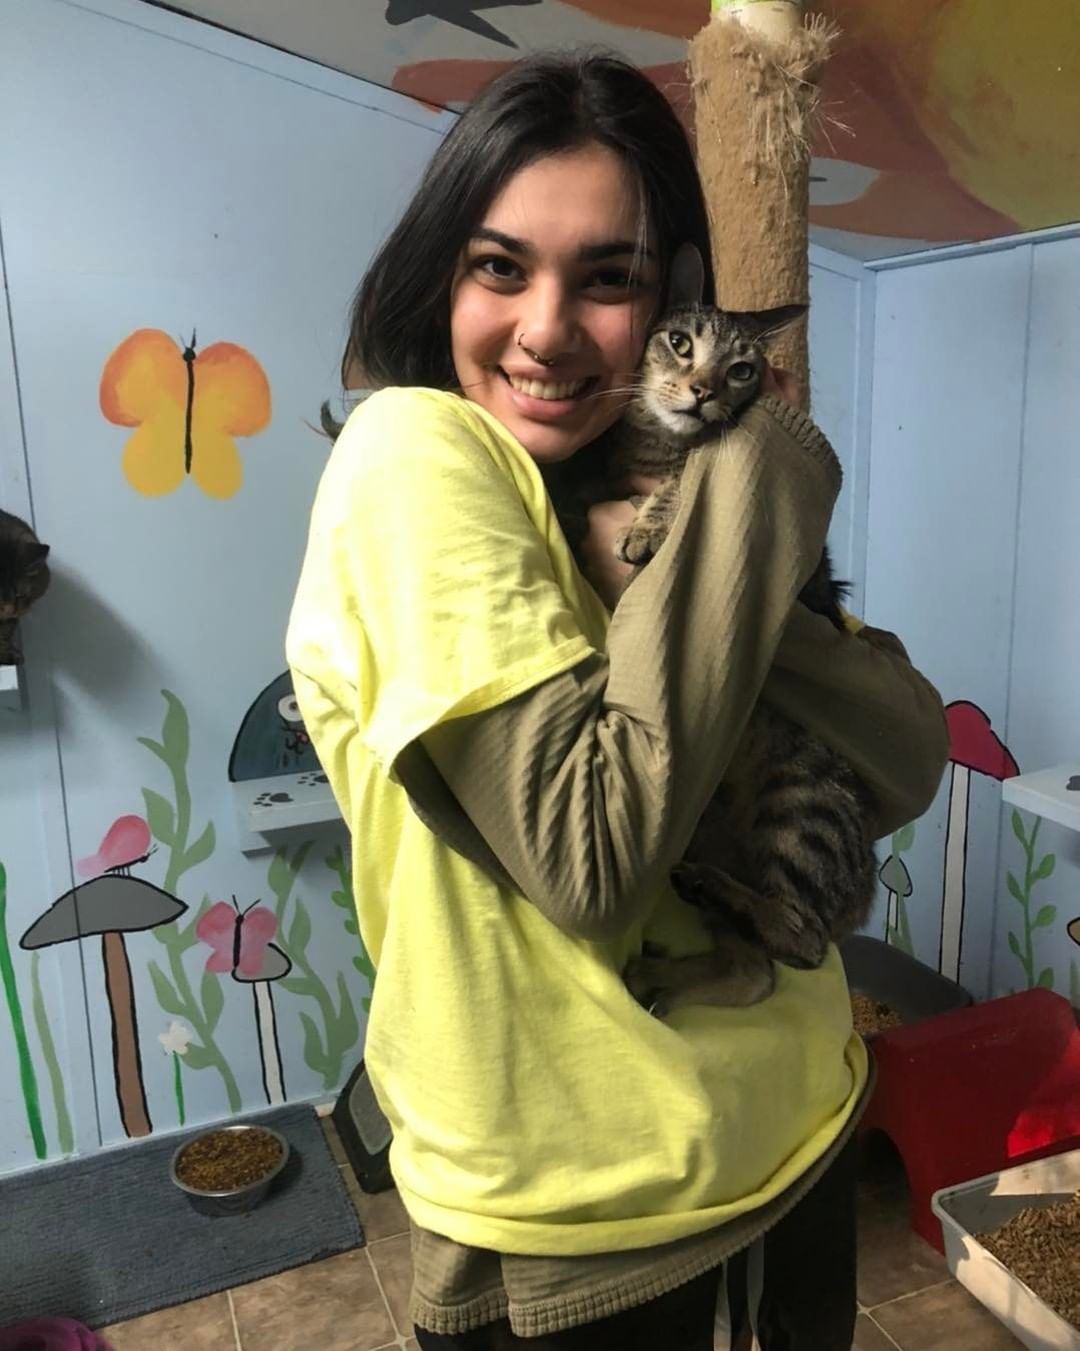 Congratulations to Finley and Serena, they are adopted! Happy tails 😸

Looking to adopt a cat or kitten? Check out our website hsharrisco.org or stop by our center.

 <a target='_blank' href='https://www.instagram.com/explore/tags/cat/'>#cat</a>  <a target='_blank' href='https://www.instagram.com/explore/tags/catlover/'>#catlover</a> <a target='_blank' href='https://www.instagram.com/explore/tags/catloverclub/'>#catloverclub</a> <a target='_blank' href='https://www.instagram.com/explore/tags/catlife/'>#catlife</a> <a target='_blank' href='https://www.instagram.com/explore/tags/happyadoptionday/'>#happyadoptionday</a> <a target='_blank' href='https://www.instagram.com/explore/tags/happytails/'>#happytails</a> <a target='_blank' href='https://www.instagram.com/explore/tags/fosteringsaveslives/'>#fosteringsaveslives</a> <a target='_blank' href='https://www.instagram.com/explore/tags/adoptme/'>#adoptme</a> <a target='_blank' href='https://www.instagram.com/explore/tags/catadoption/'>#catadoption</a> <a target='_blank' href='https://www.instagram.com/explore/tags/whywerescue/'>#whywerescue</a> <a target='_blank' href='https://www.instagram.com/explore/tags/kitten/'>#kitten</a>